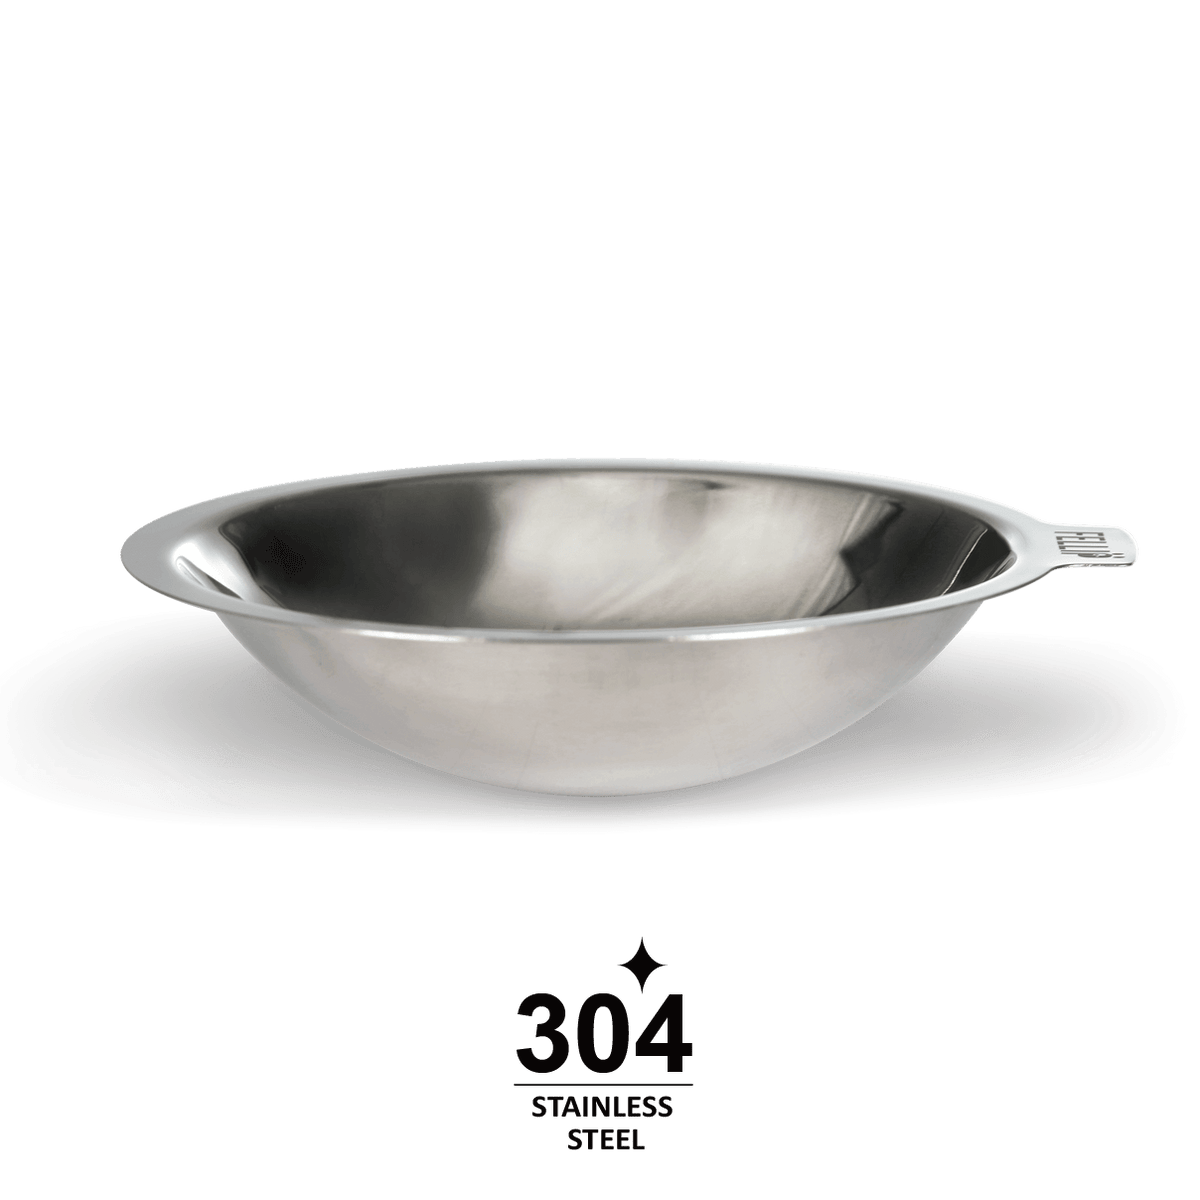 Felli Oblik Cat Dog Bowl - 304 Stainless Steel Replacement Dish 0.5 Cups / 304 Stainless Steel